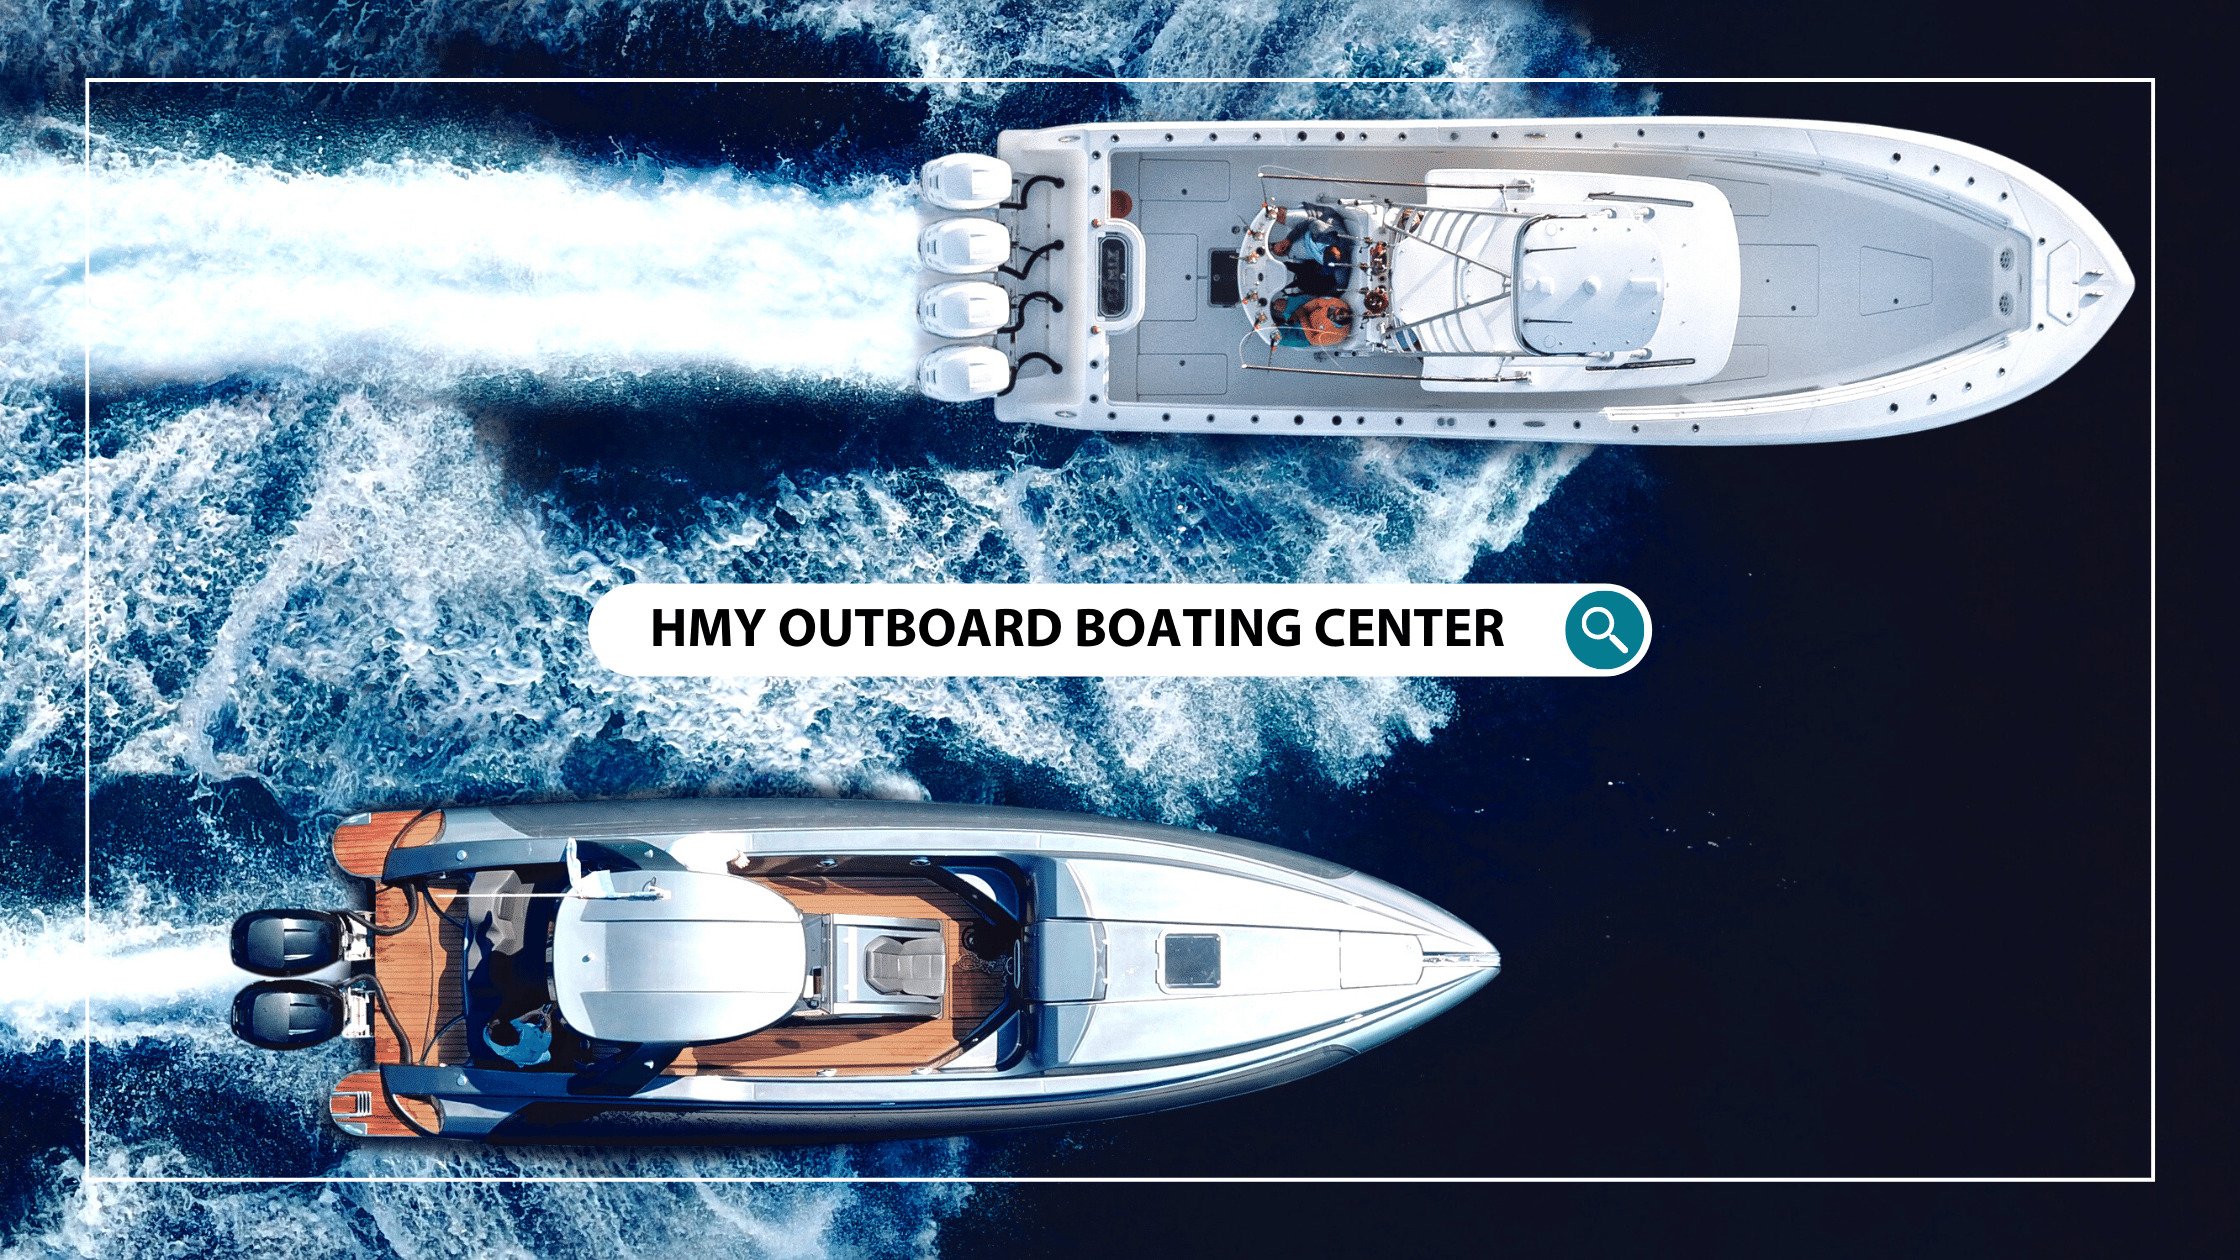 HMY Outboard Boating Center: Your Premier Destination For Boats Up to 40′